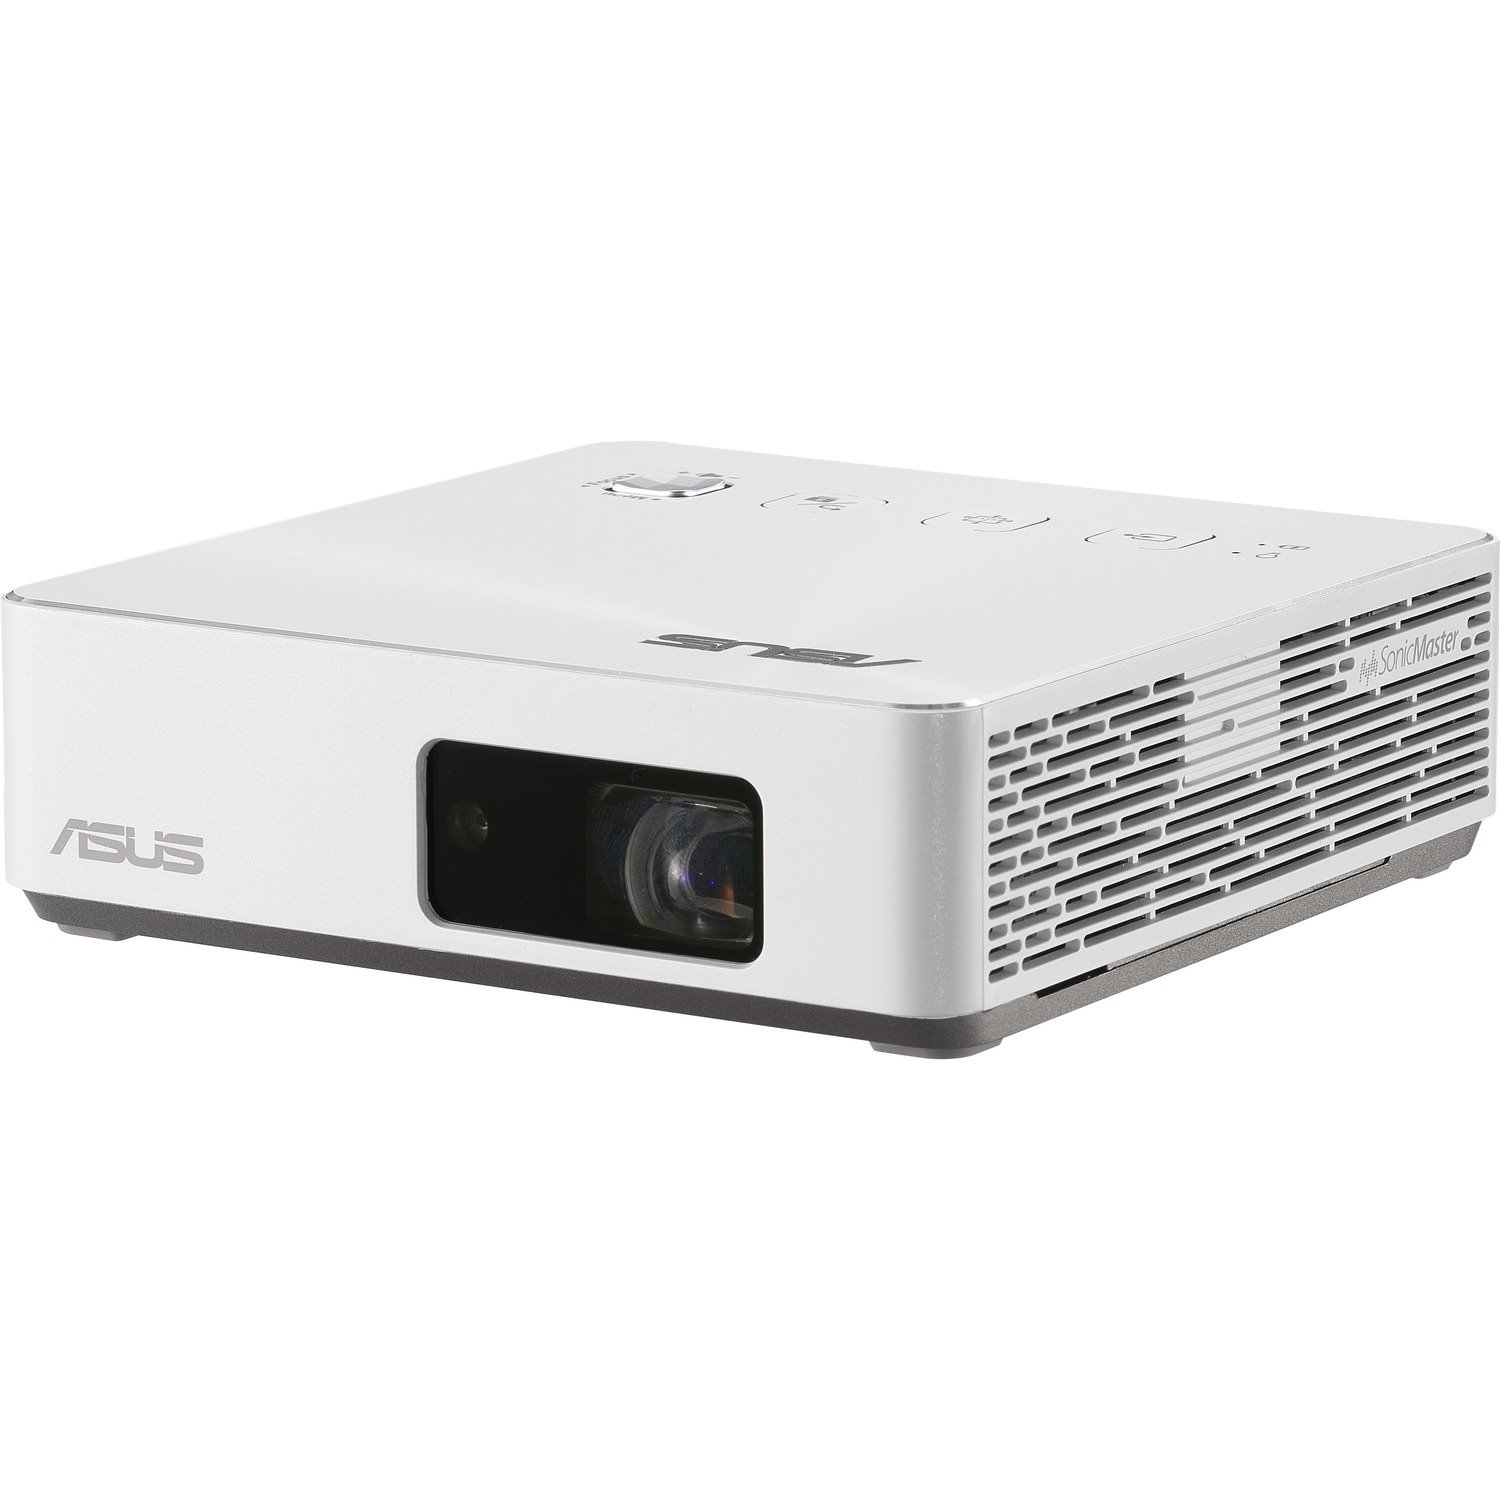 Asus ZenBeam S2 3D Ready Short Throw DLP Projector - 16:9 - Ceiling Mountable, Portable, Floor Mountable - White